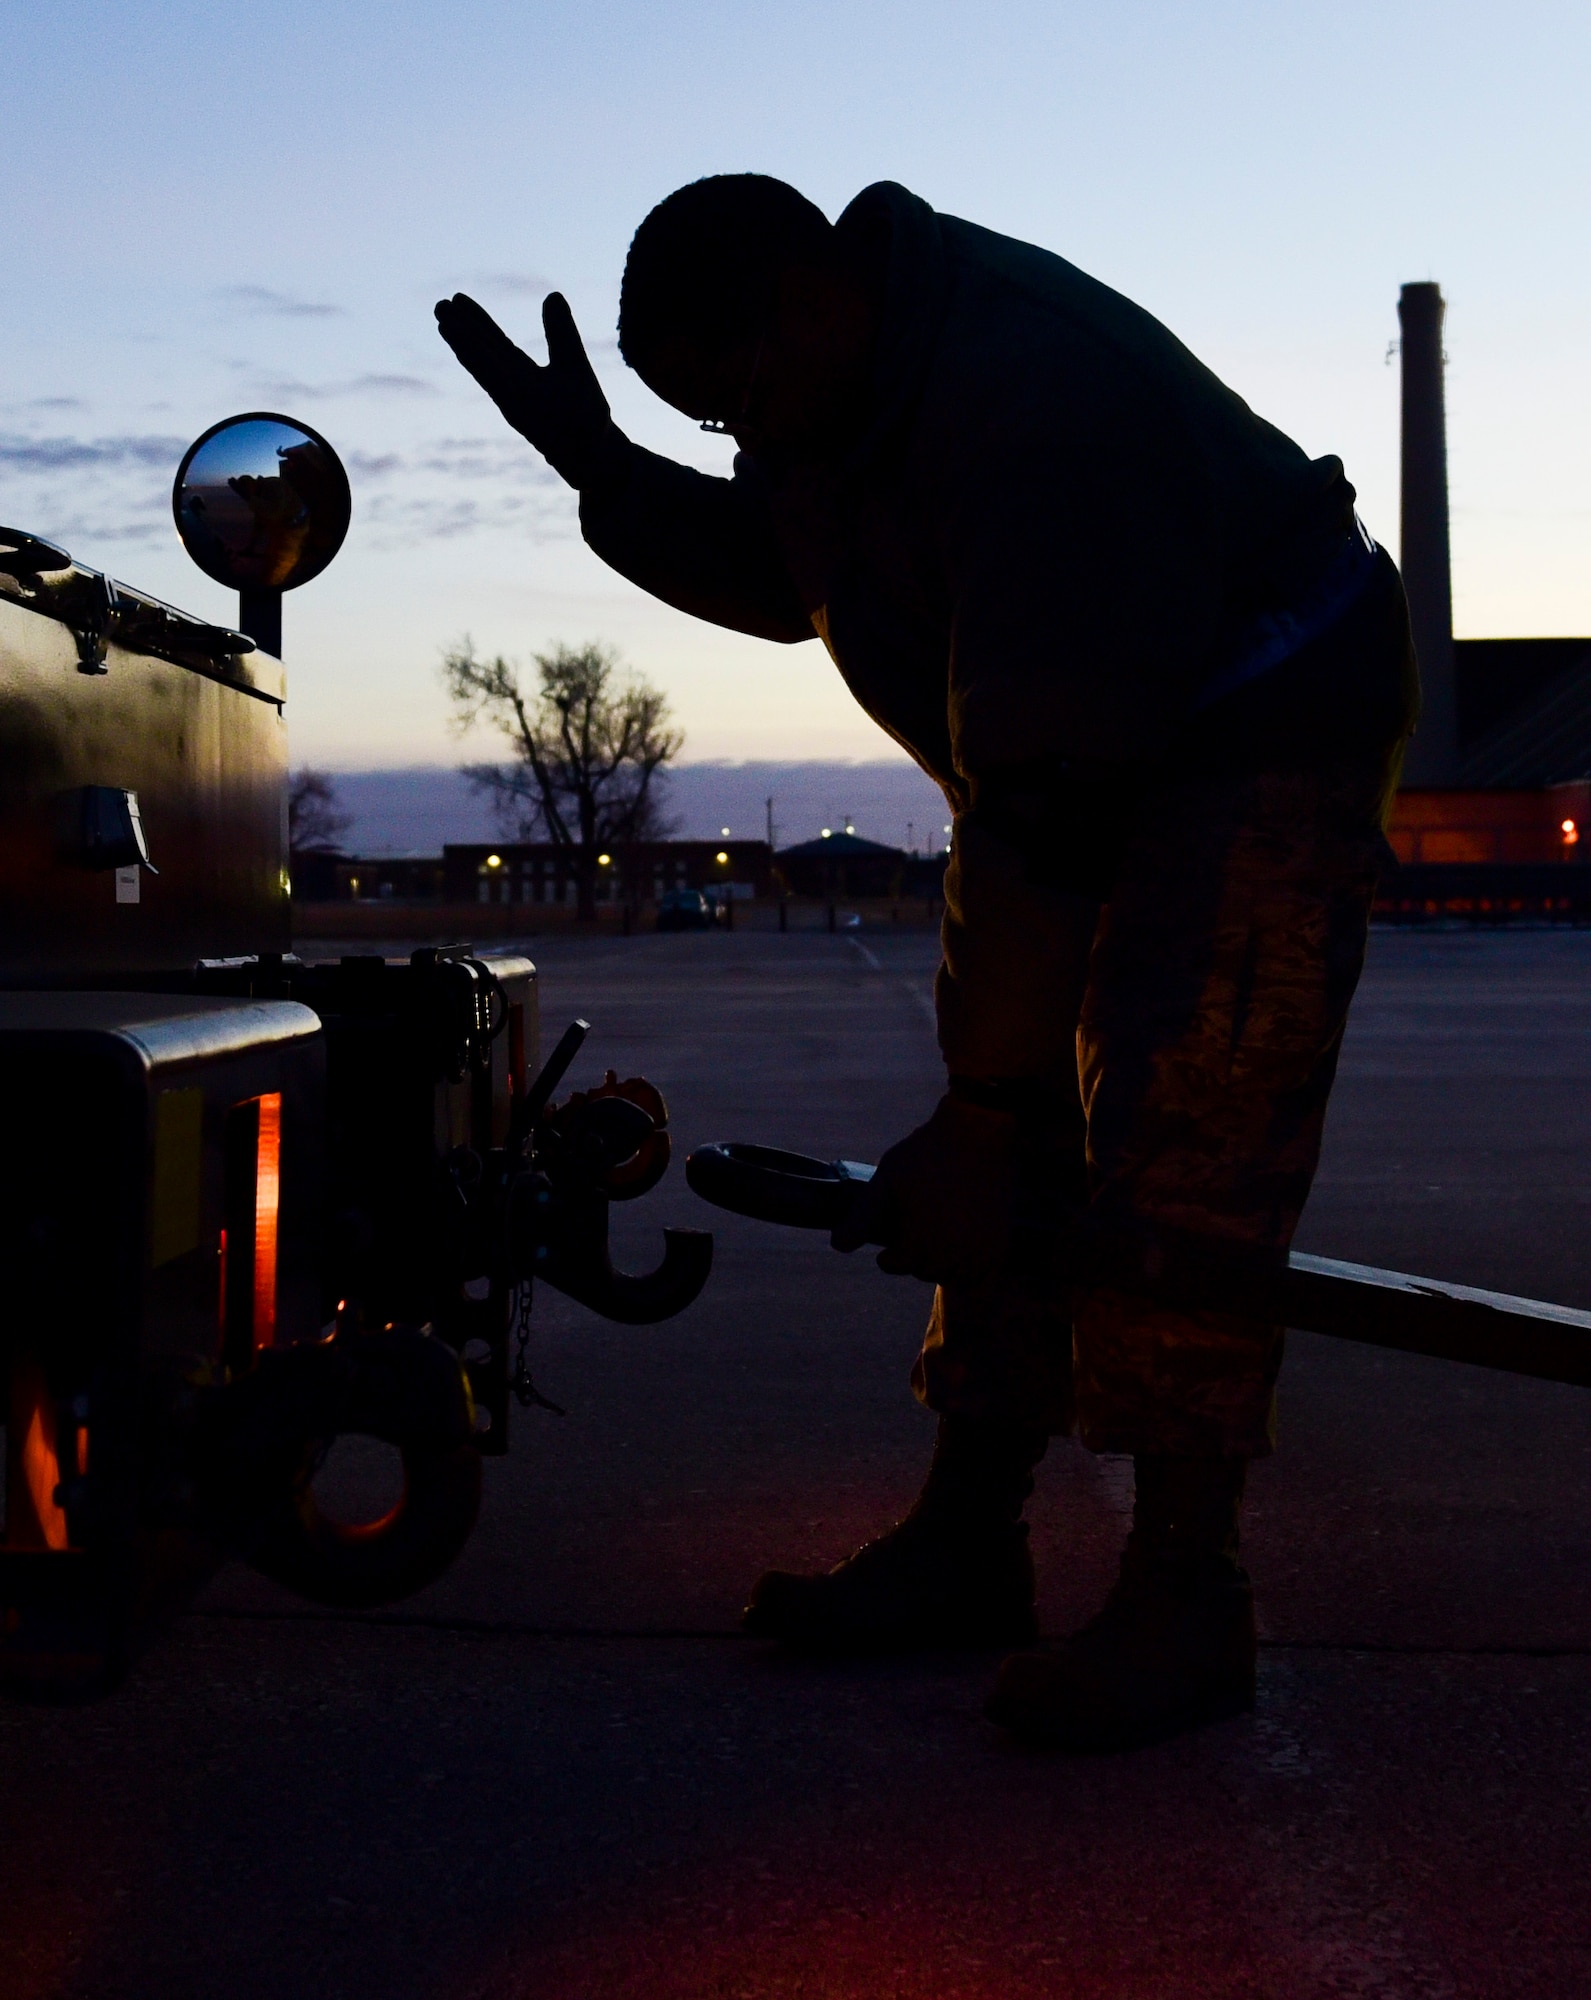 Master Sgt. Jeremie Washington, the 28th Maintenance Squadron production superintendent of aerospace ground equipment, guides a driver at Ellsworth Air Force Base, S.D., Feb. 2, 2018. Cargo returning from deployments is unloaded by the 28th Logistics Readiness Squadron and returned to its respective units. (U.S. Air Force photo by Senior Airman Randahl J. Jenson)